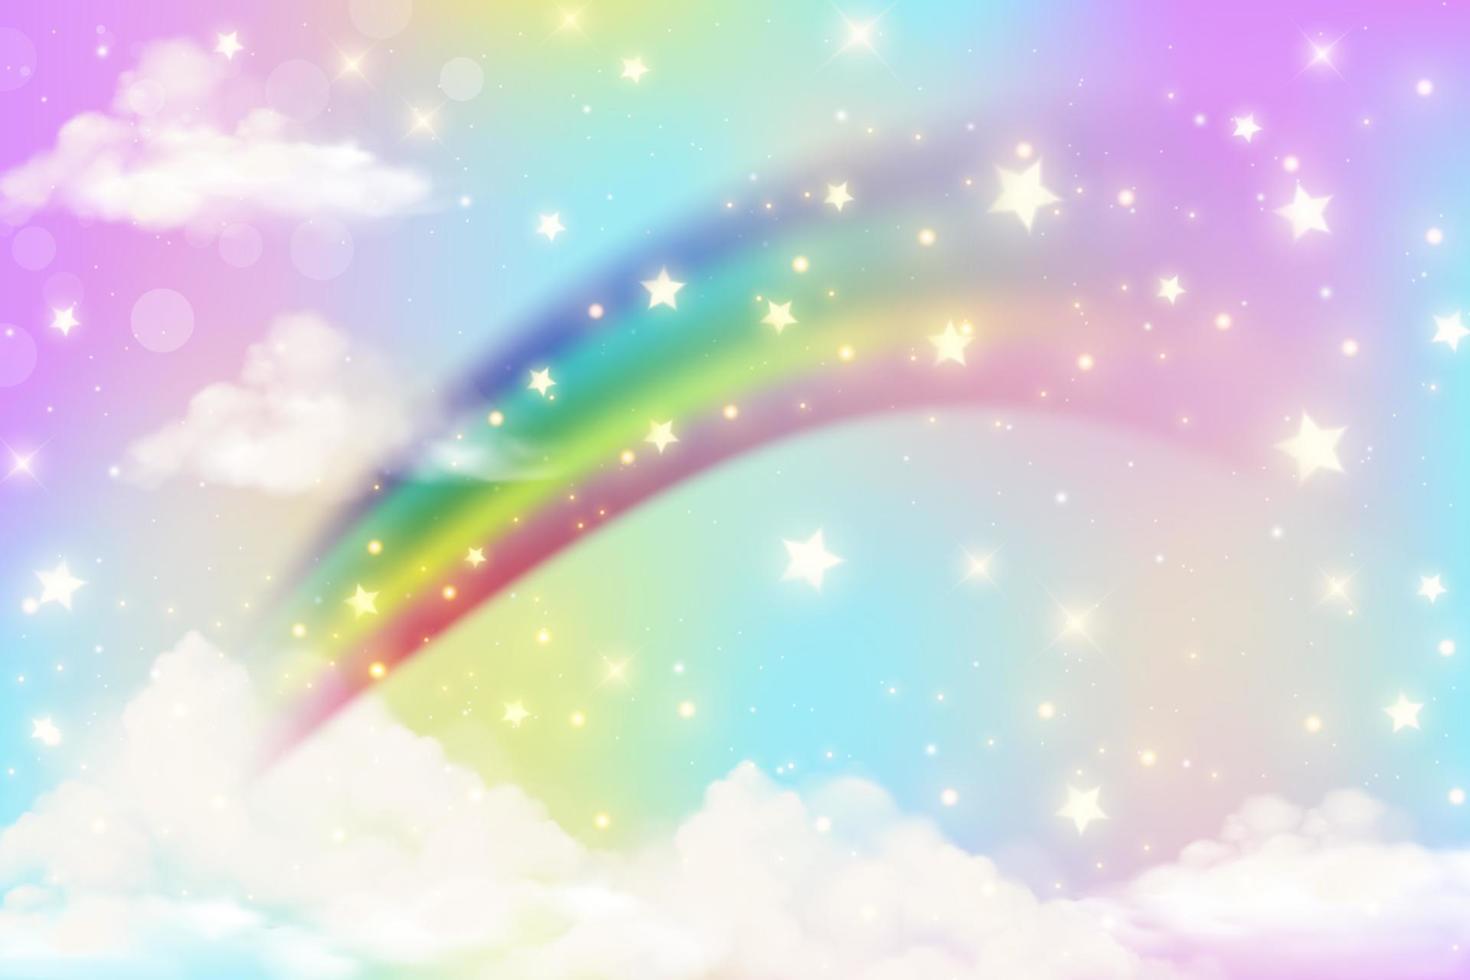 Abstract rainbow background with clouds and stars on sky. Fantasy pastel color unicorn wallpaper. Cute landscape. Vector illustration.